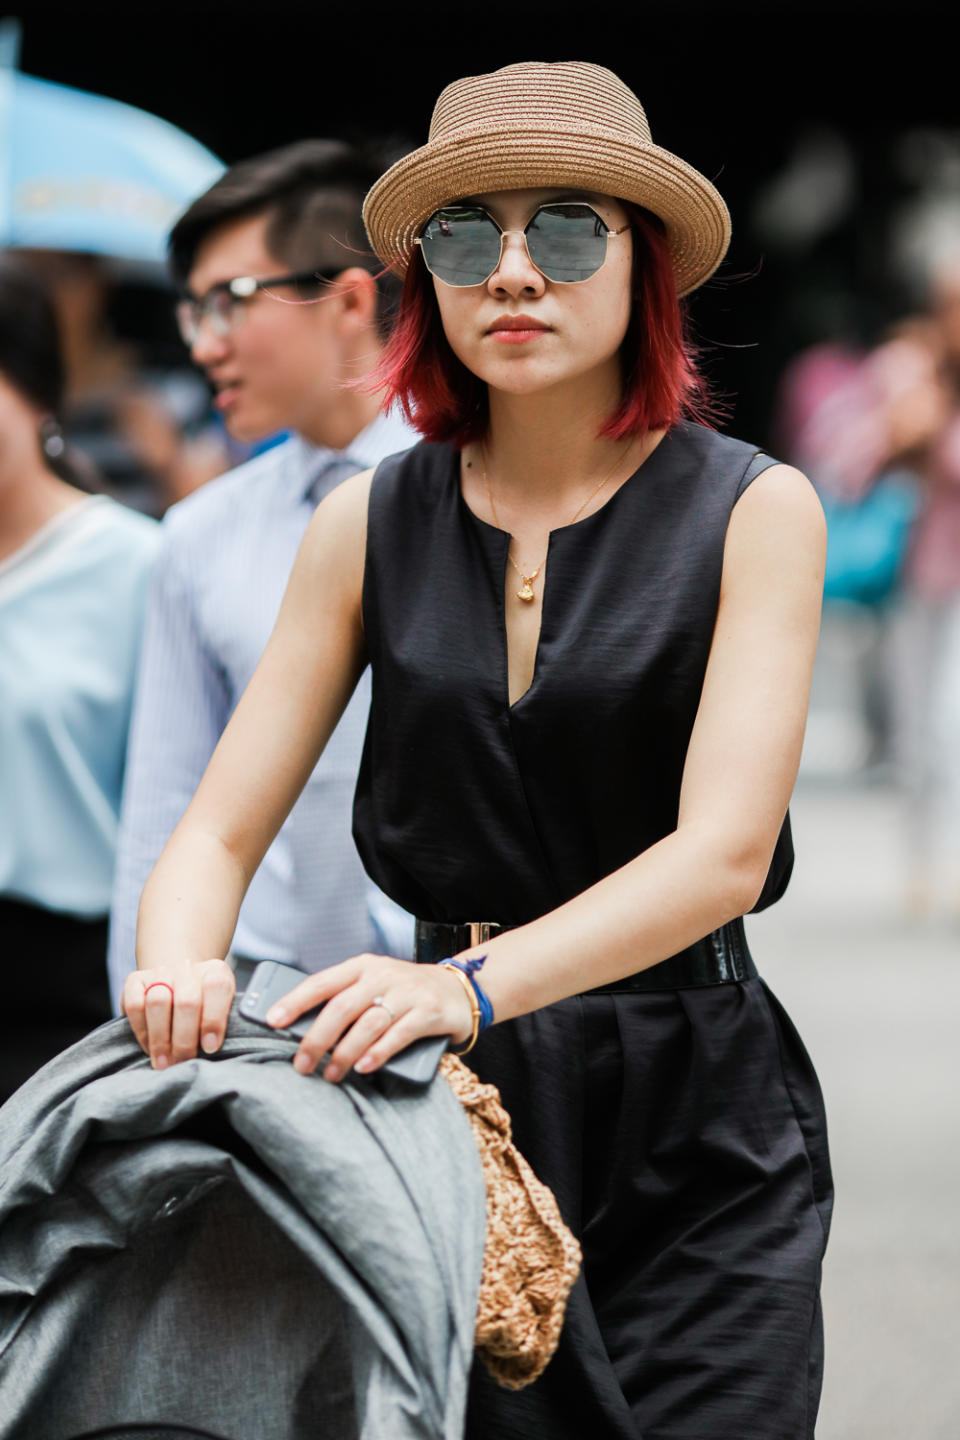 Street style inspiration from the streets of Singapore (12)